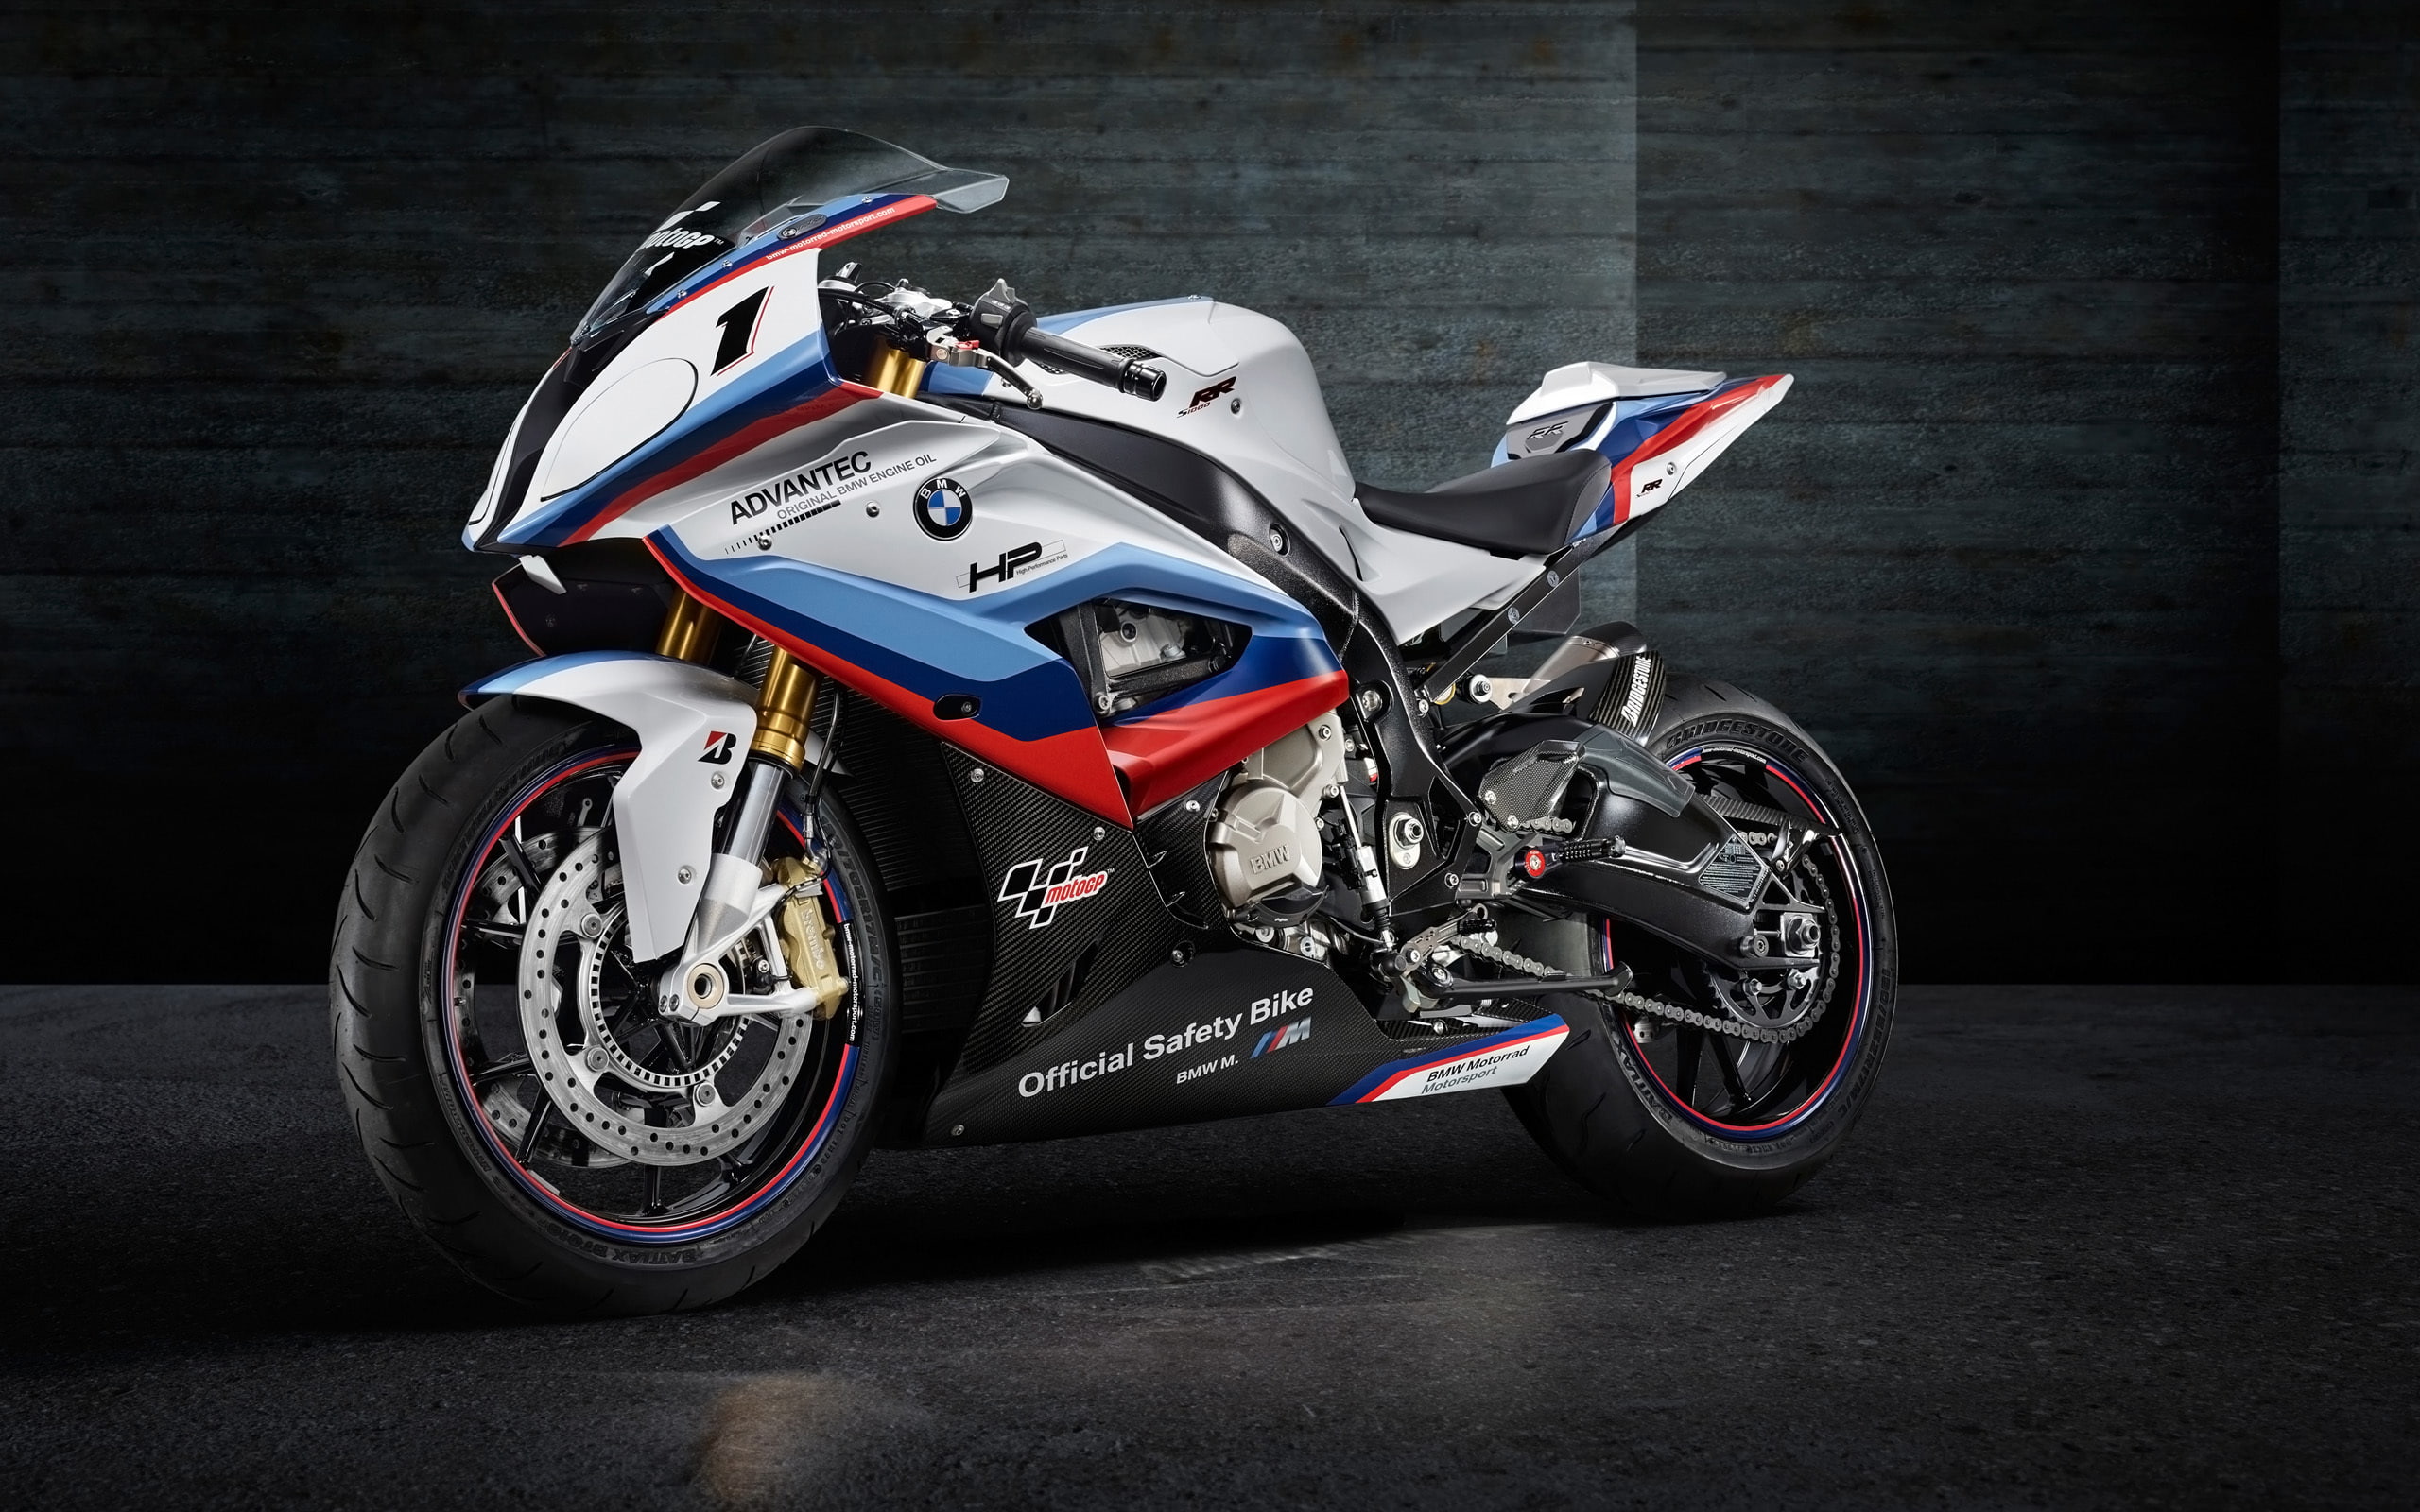 BMW S1000RR MotoGP Safety Bike HD, bikes, motorcycles, bikes and motorcycles